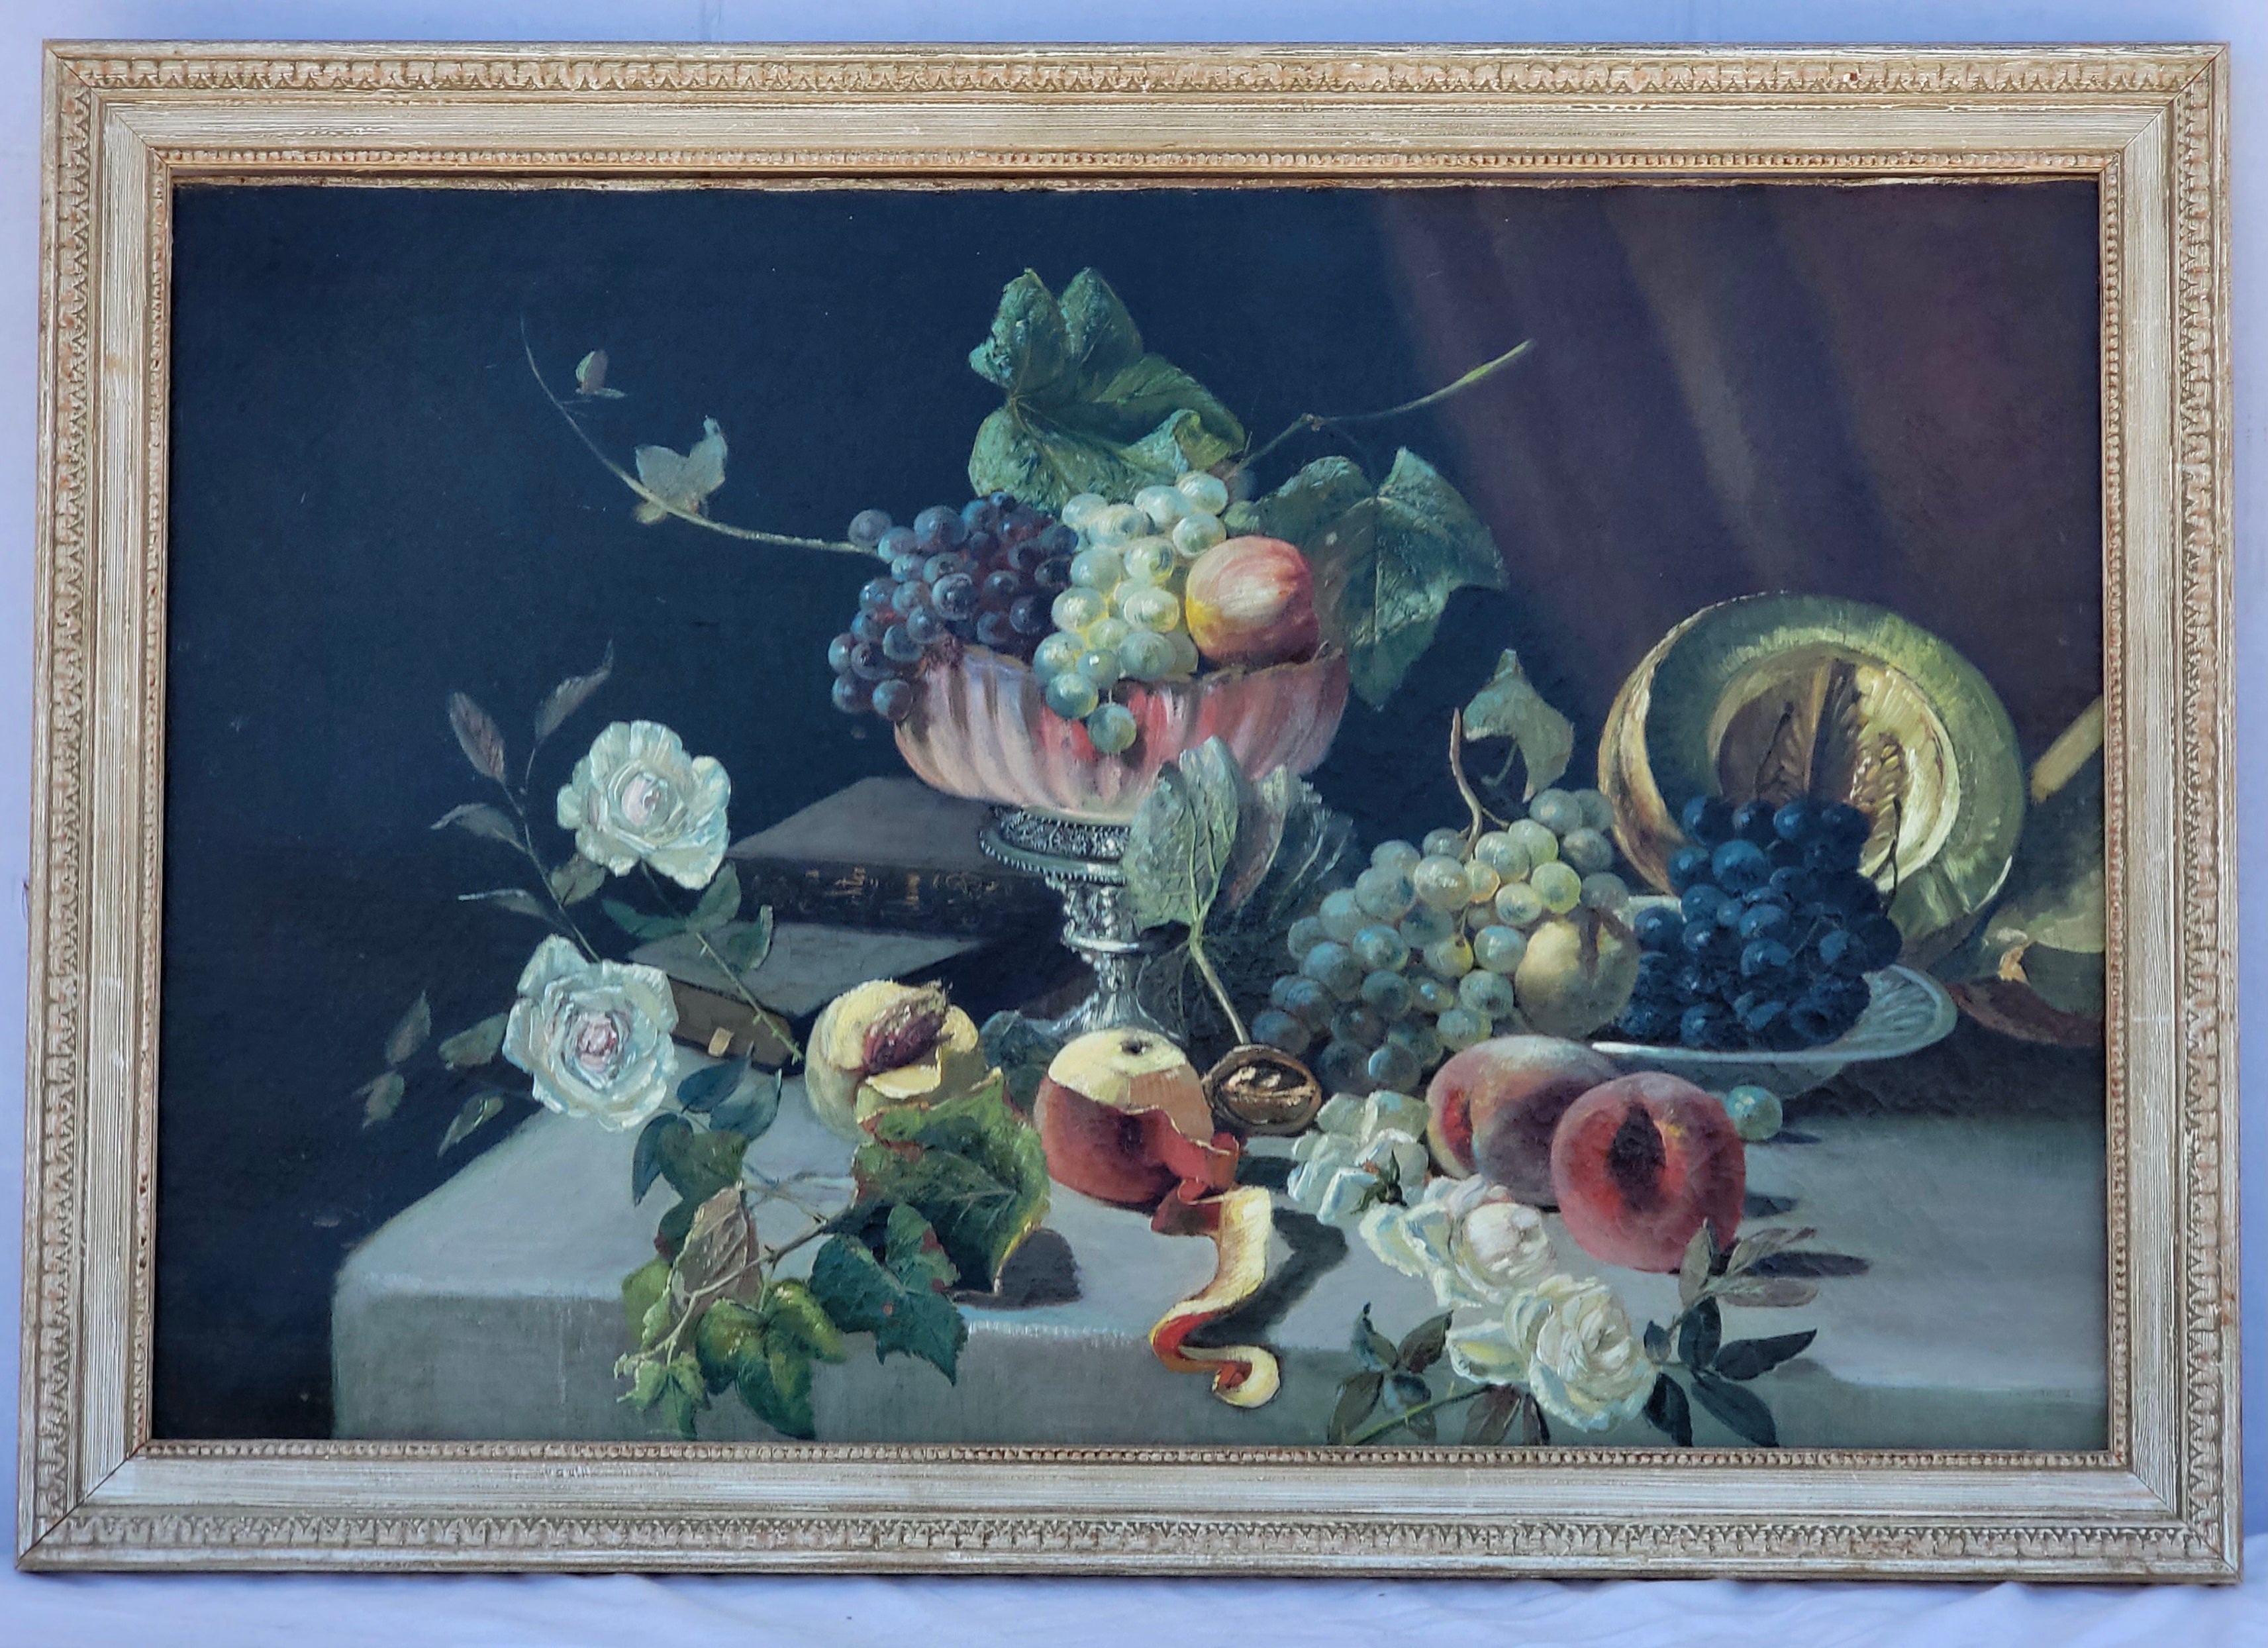 This is a 19th century English still life oil painting depicting fruit and books casually displayed on a dining table. It appears to be unsigned. The painting minus frame is 29.75”L x 19.75”H.